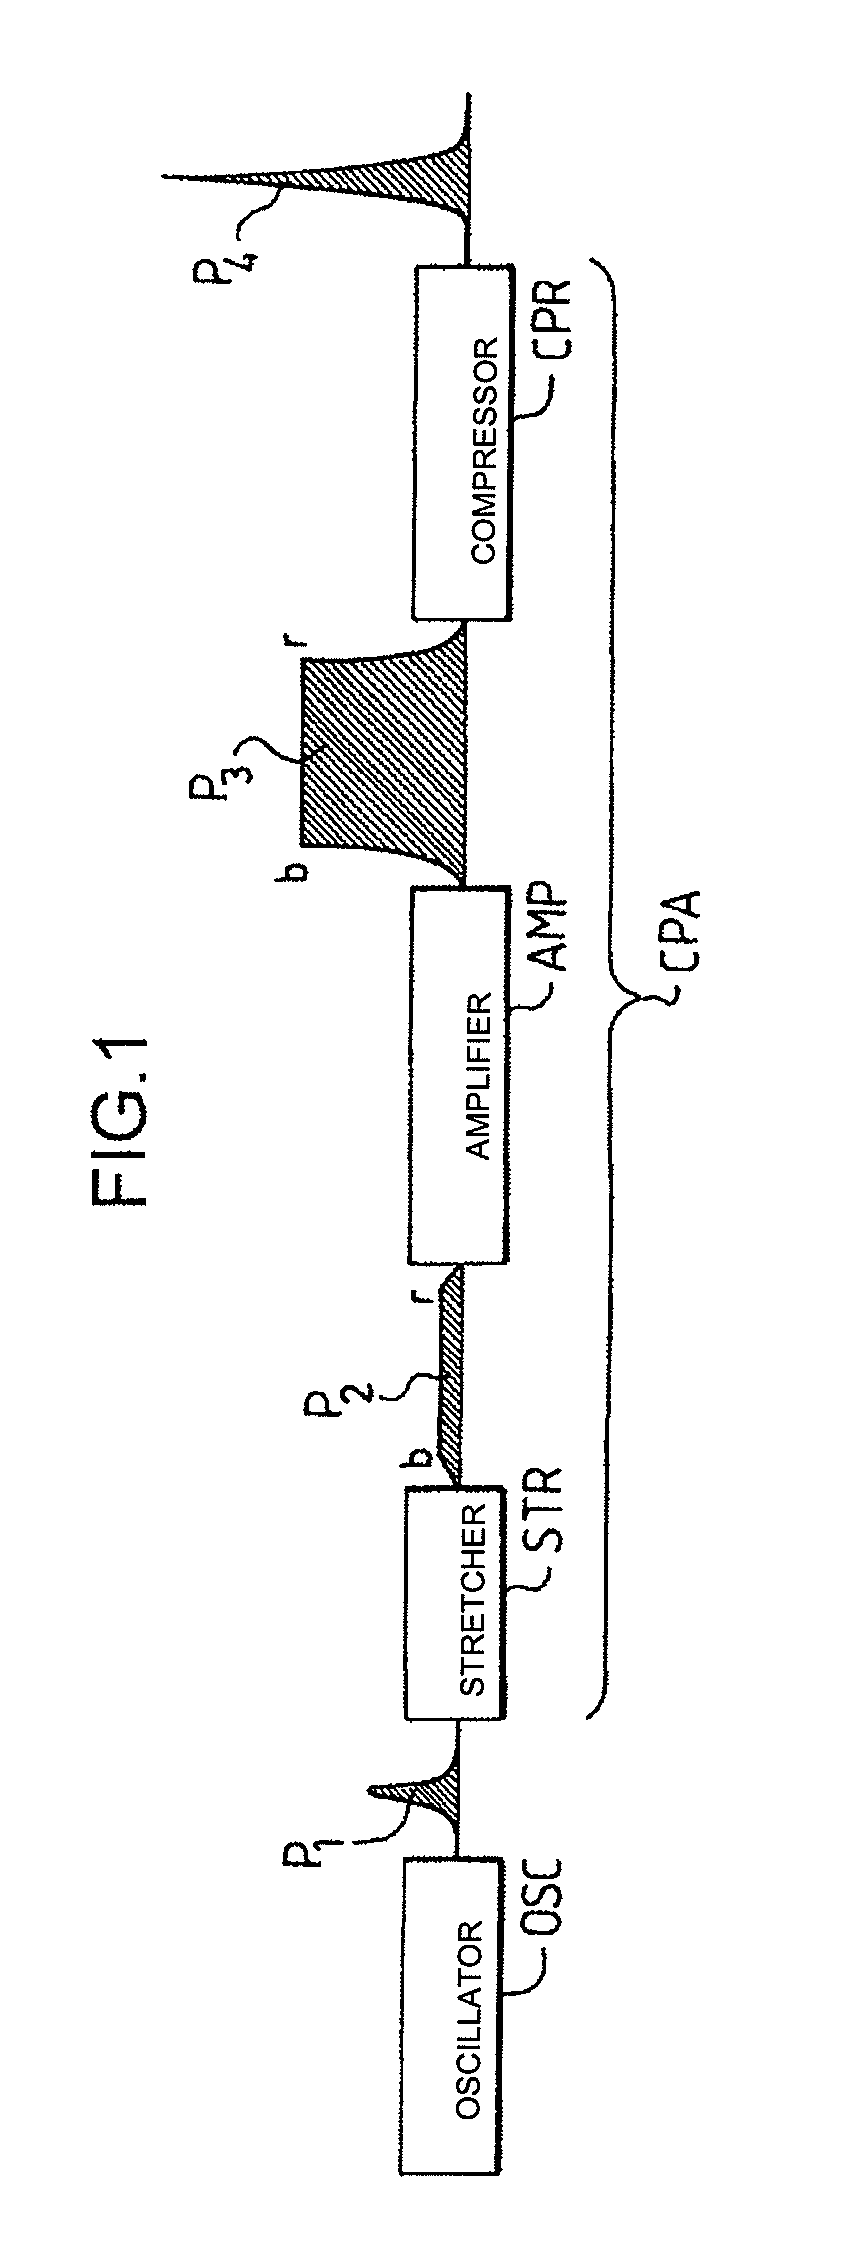 Amplifier chain for generating ultrashort different width light pulses